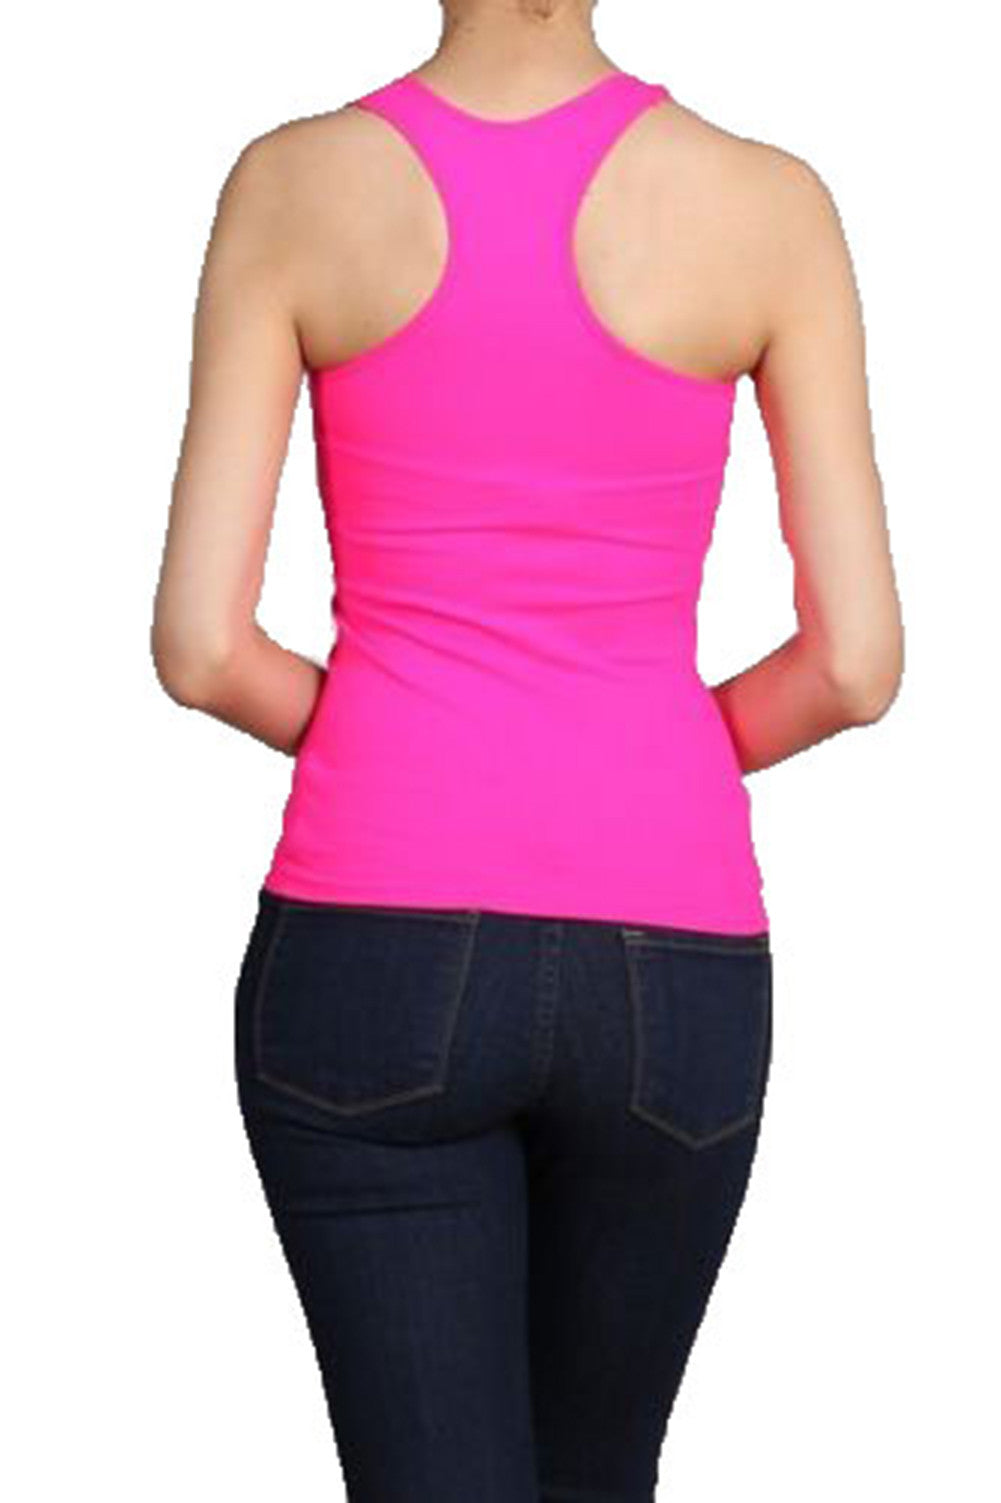 NEON SEAMLESS BASIC RIB-KNIT RACERBACK TANK TOP ONE SIZE ATHLETIC SPORT T-SHIRT - Neon Nation